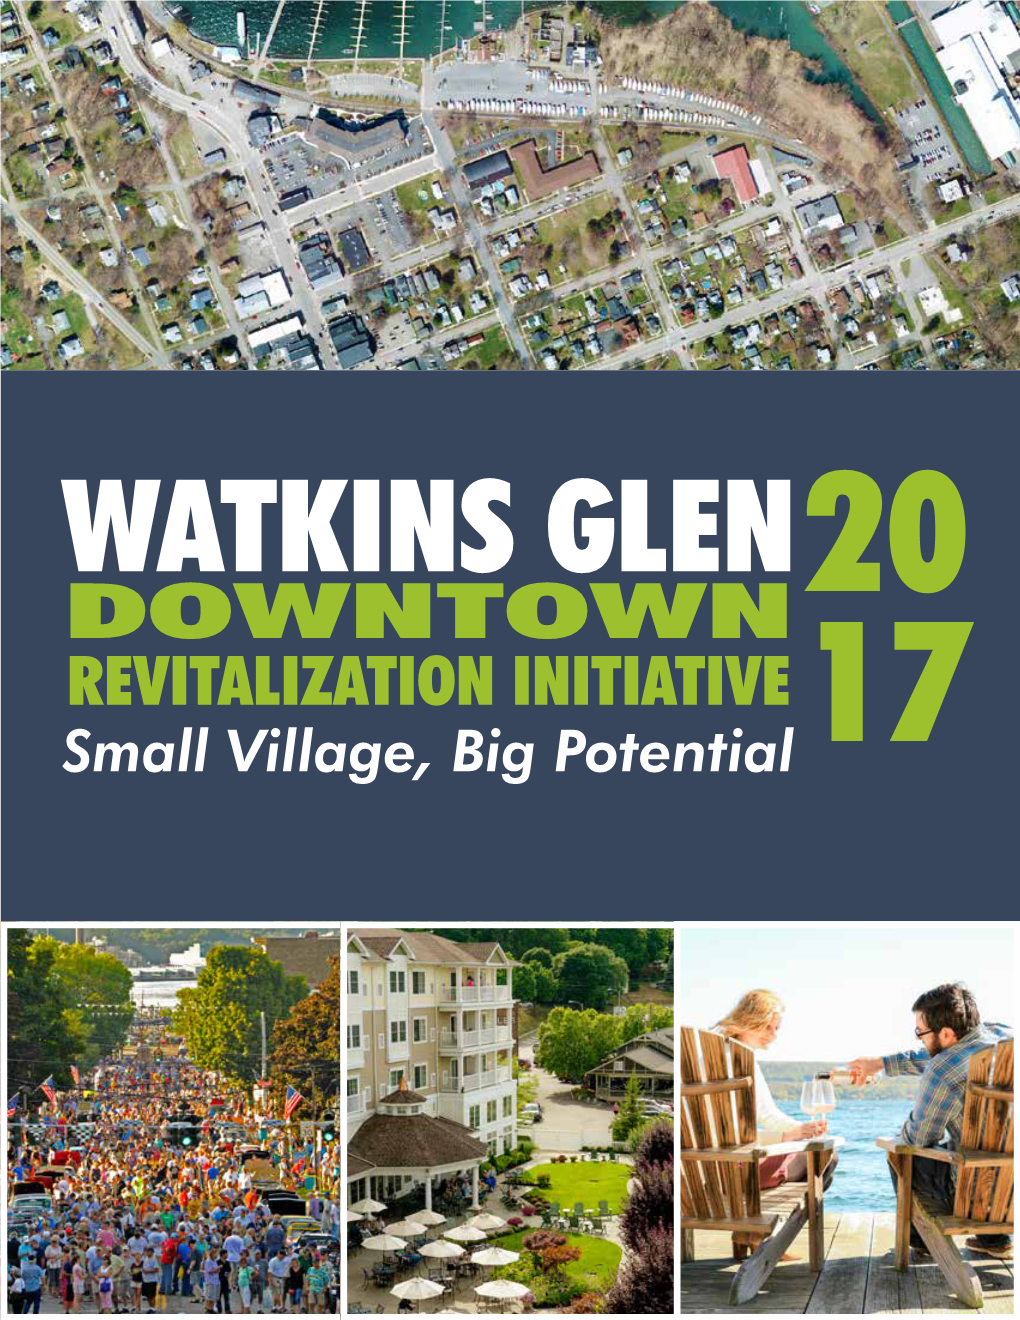 Watkins Glen Is a Symbol of Local Quality of Life; Economic Health, Community Pride, and History